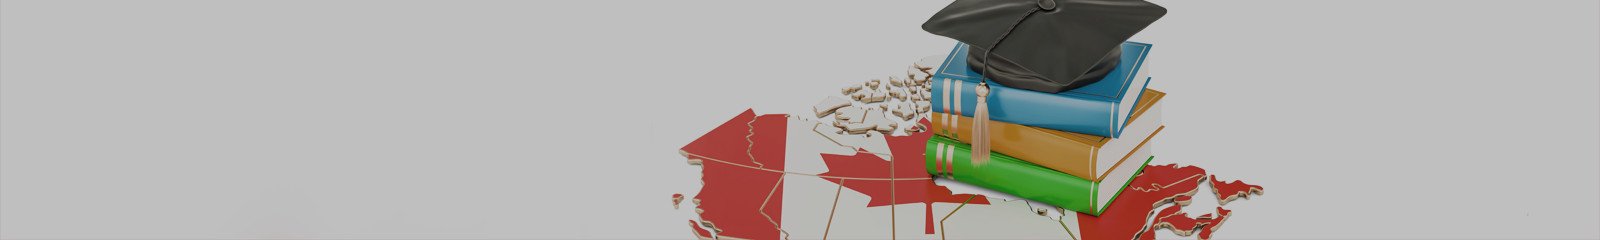 Canada's education system has a prestigious reputation, and studying in Canada is very affordable for thousands of international students each year.